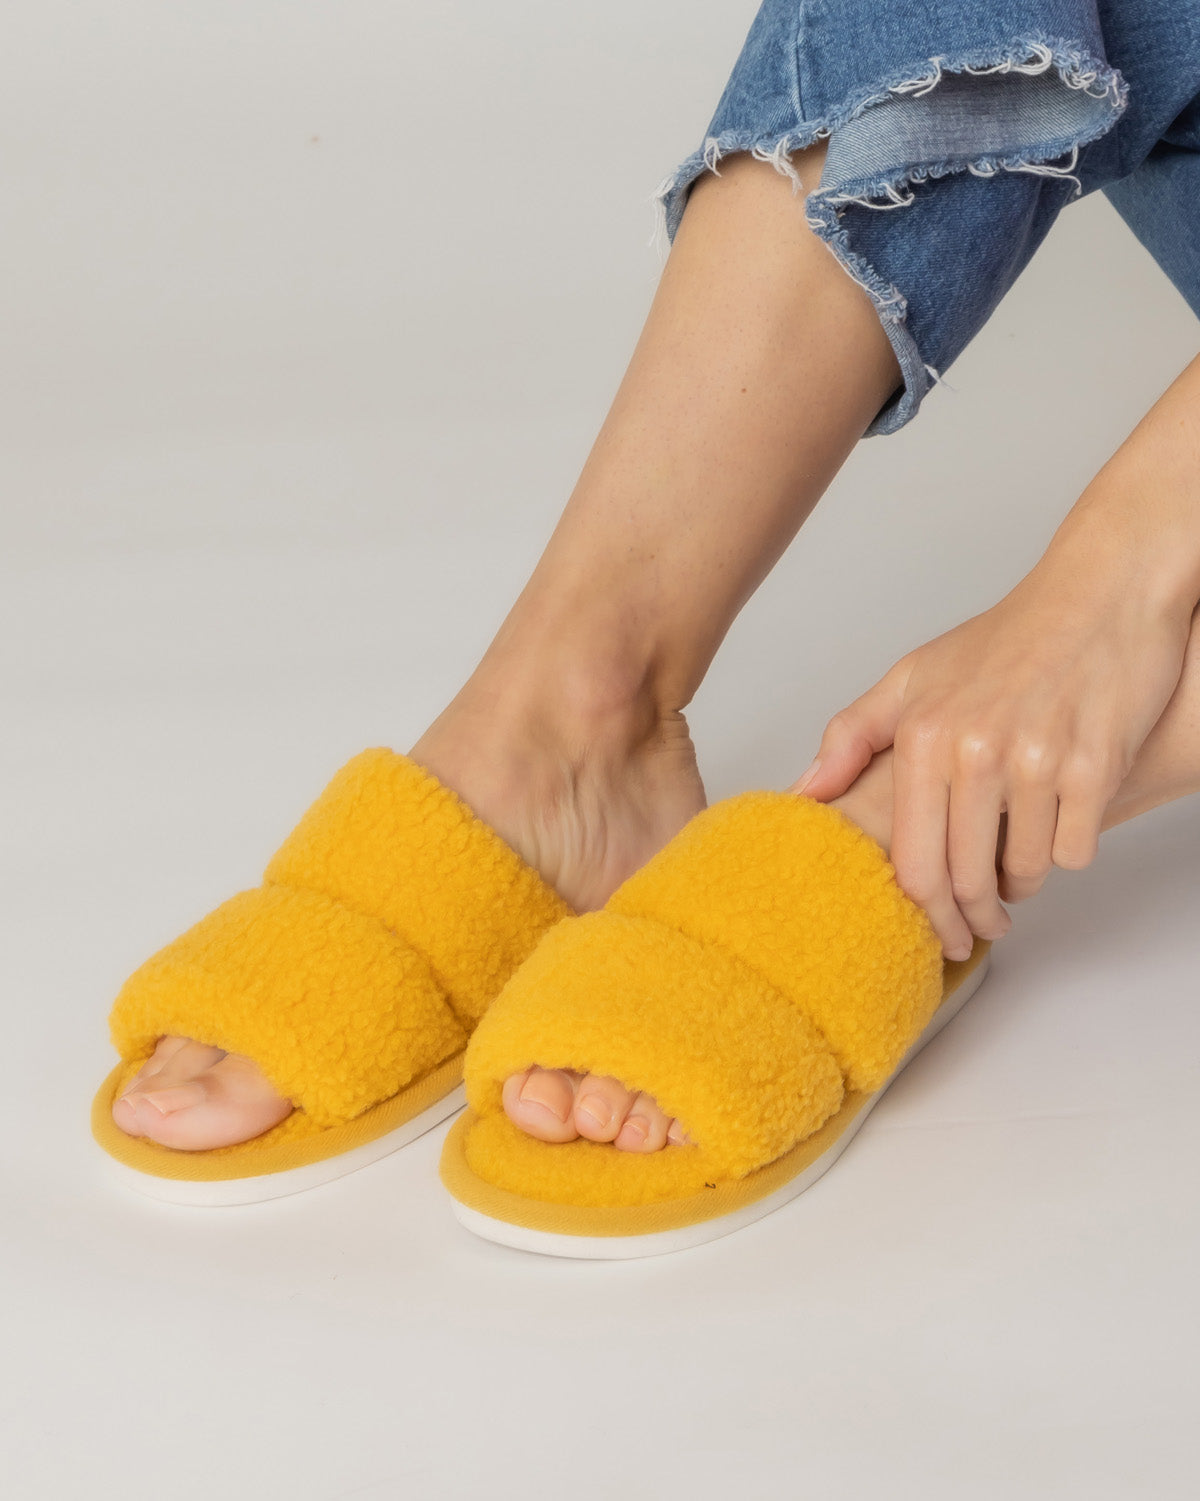 Soid Sherpa Slippers (mix pack)